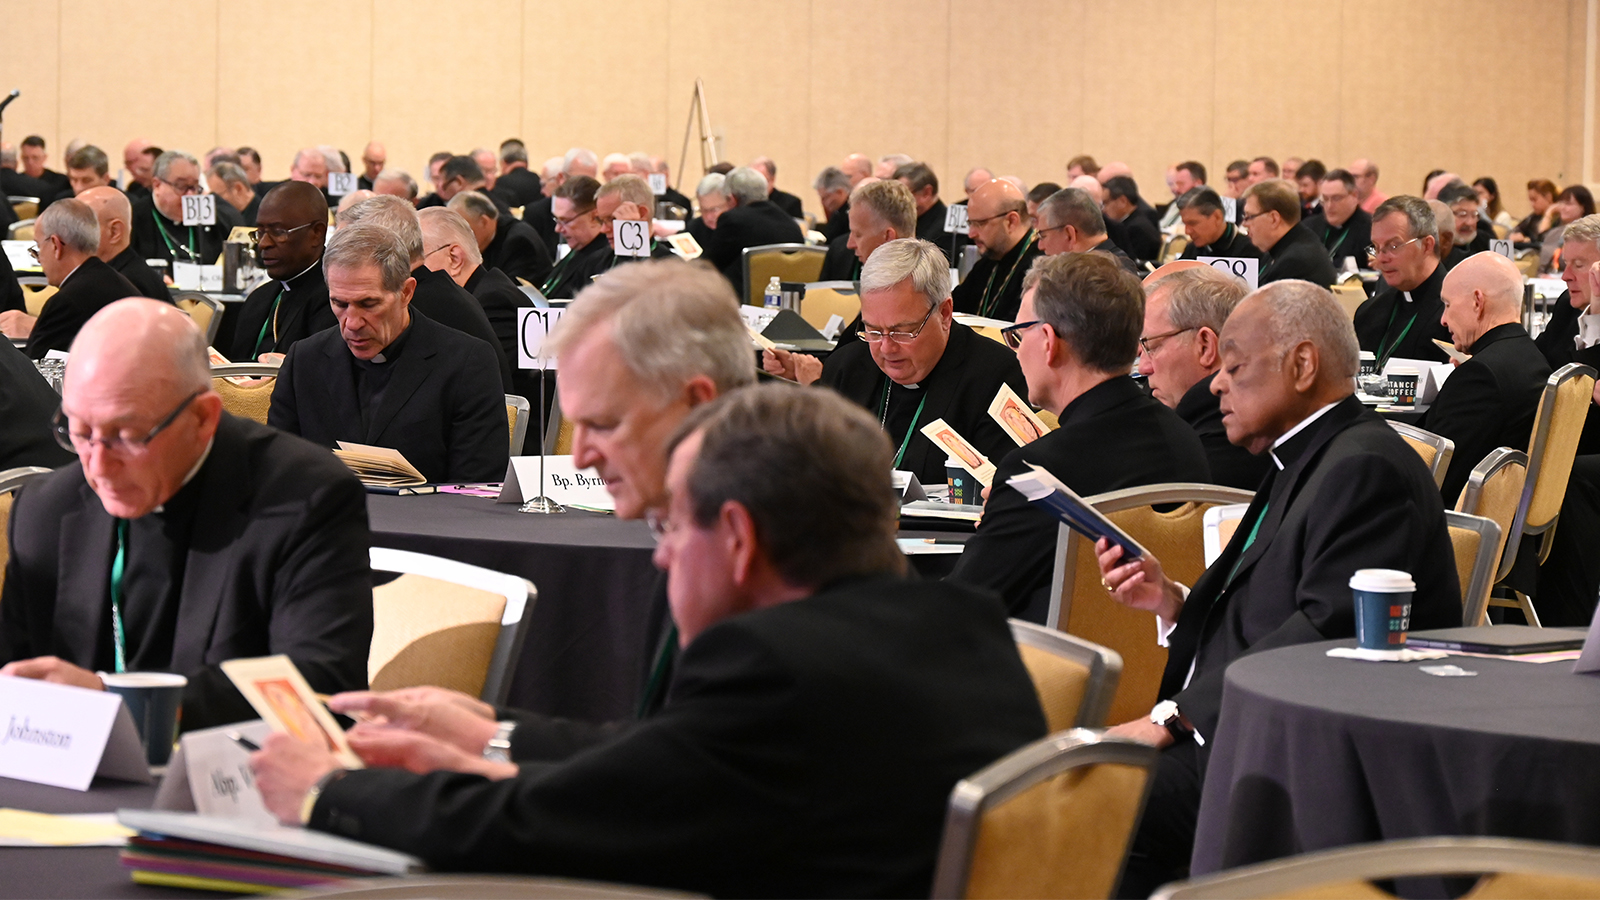 The U.S. Conference of Catholic Bishops meets in Orlando, Florida, Thursday, June 15, 2023. RNS photo by Jack Jenkins